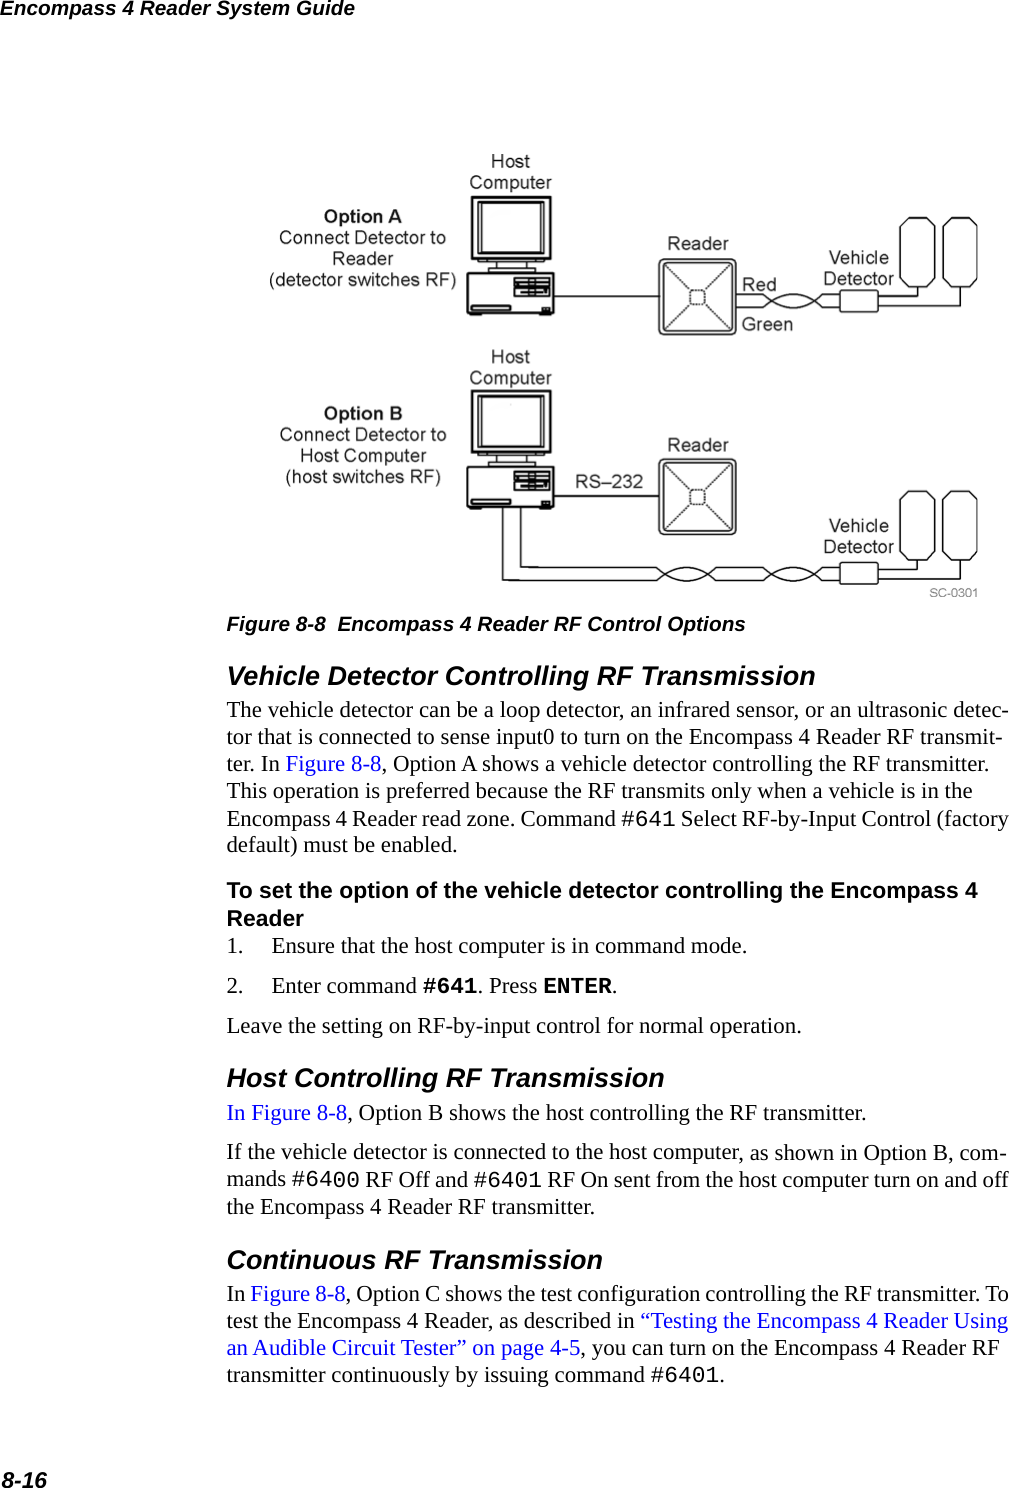 Encompass 4 Reader System Guide8-16Figure 8-8  Encompass 4 Reader RF Control OptionsVehicle Detector Controlling RF TransmissionThe vehicle detector can be a loop detector, an infrared sensor, or an ultrasonic detec-tor that is connected to sense input0 to turn on the Encompass 4 Reader RF transmit-ter. In Figure 8-8, Option A shows a vehicle detector controlling the RF transmitter. This operation is preferred because the RF transmits only when a vehicle is in the Encompass 4 Reader read zone. Command #641 Select RF-by-Input Control (factory default) must be enabled.To set the option of the vehicle detector controlling the Encompass 4 Reader 1. Ensure that the host computer is in command mode.2. Enter command #641. Press ENTER.Leave the setting on RF-by-input control for normal operation. Host Controlling RF TransmissionIn Figure 8-8, Option B shows the host controlling the RF transmitter. If the vehicle detector is connected to the host computer, as shown in Option B, com-mands #6400 RF Off and #6401 RF On sent from the host computer turn on and off the Encompass 4 Reader RF transmitter. Continuous RF TransmissionIn Figure 8-8, Option C shows the test configuration controlling the RF transmitter. To test the Encompass 4 Reader, as described in “Testing the Encompass 4 Reader Using an Audible Circuit Tester” on page 4-5, you can turn on the Encompass 4 Reader RF transmitter continuously by issuing command #6401.